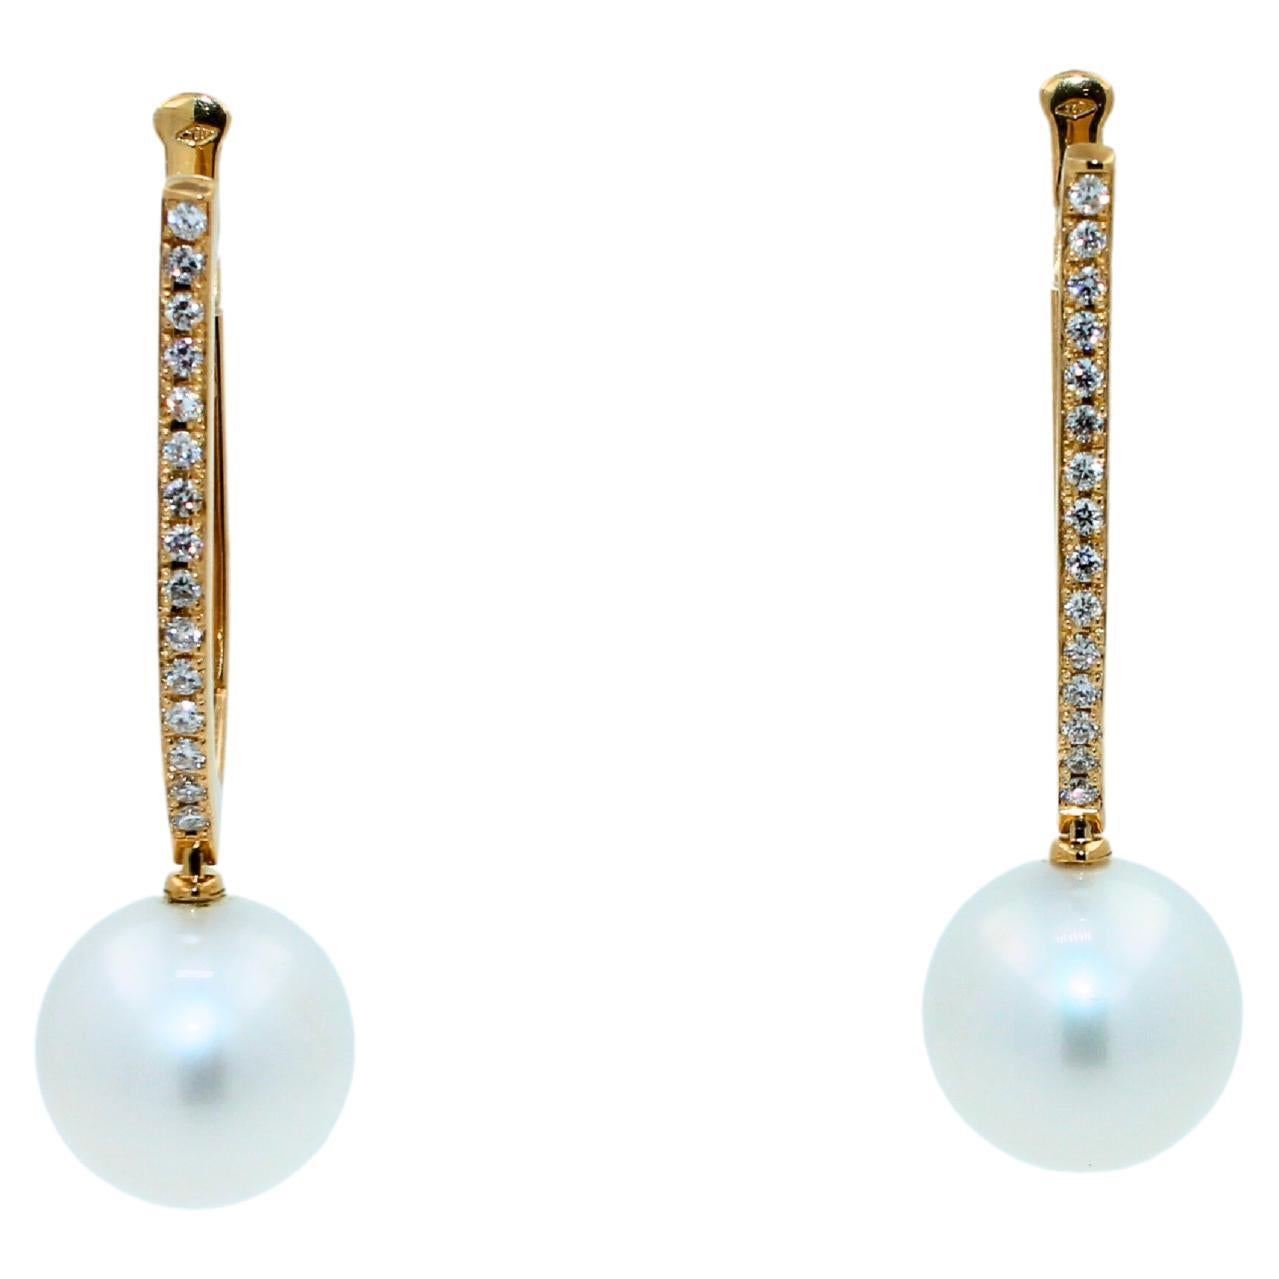 White AAA Quality South Sea Pearls
Size 14MM Diameter
Striking Silvery Hue with Light Blue Iridescent  Tones
Very Reflective Surface - Almost Mirror-Like 
1.50 cts Diamonds VVS Quality
14.35 Grams Total Weight
5 cm length of full earrings
18K Yellow